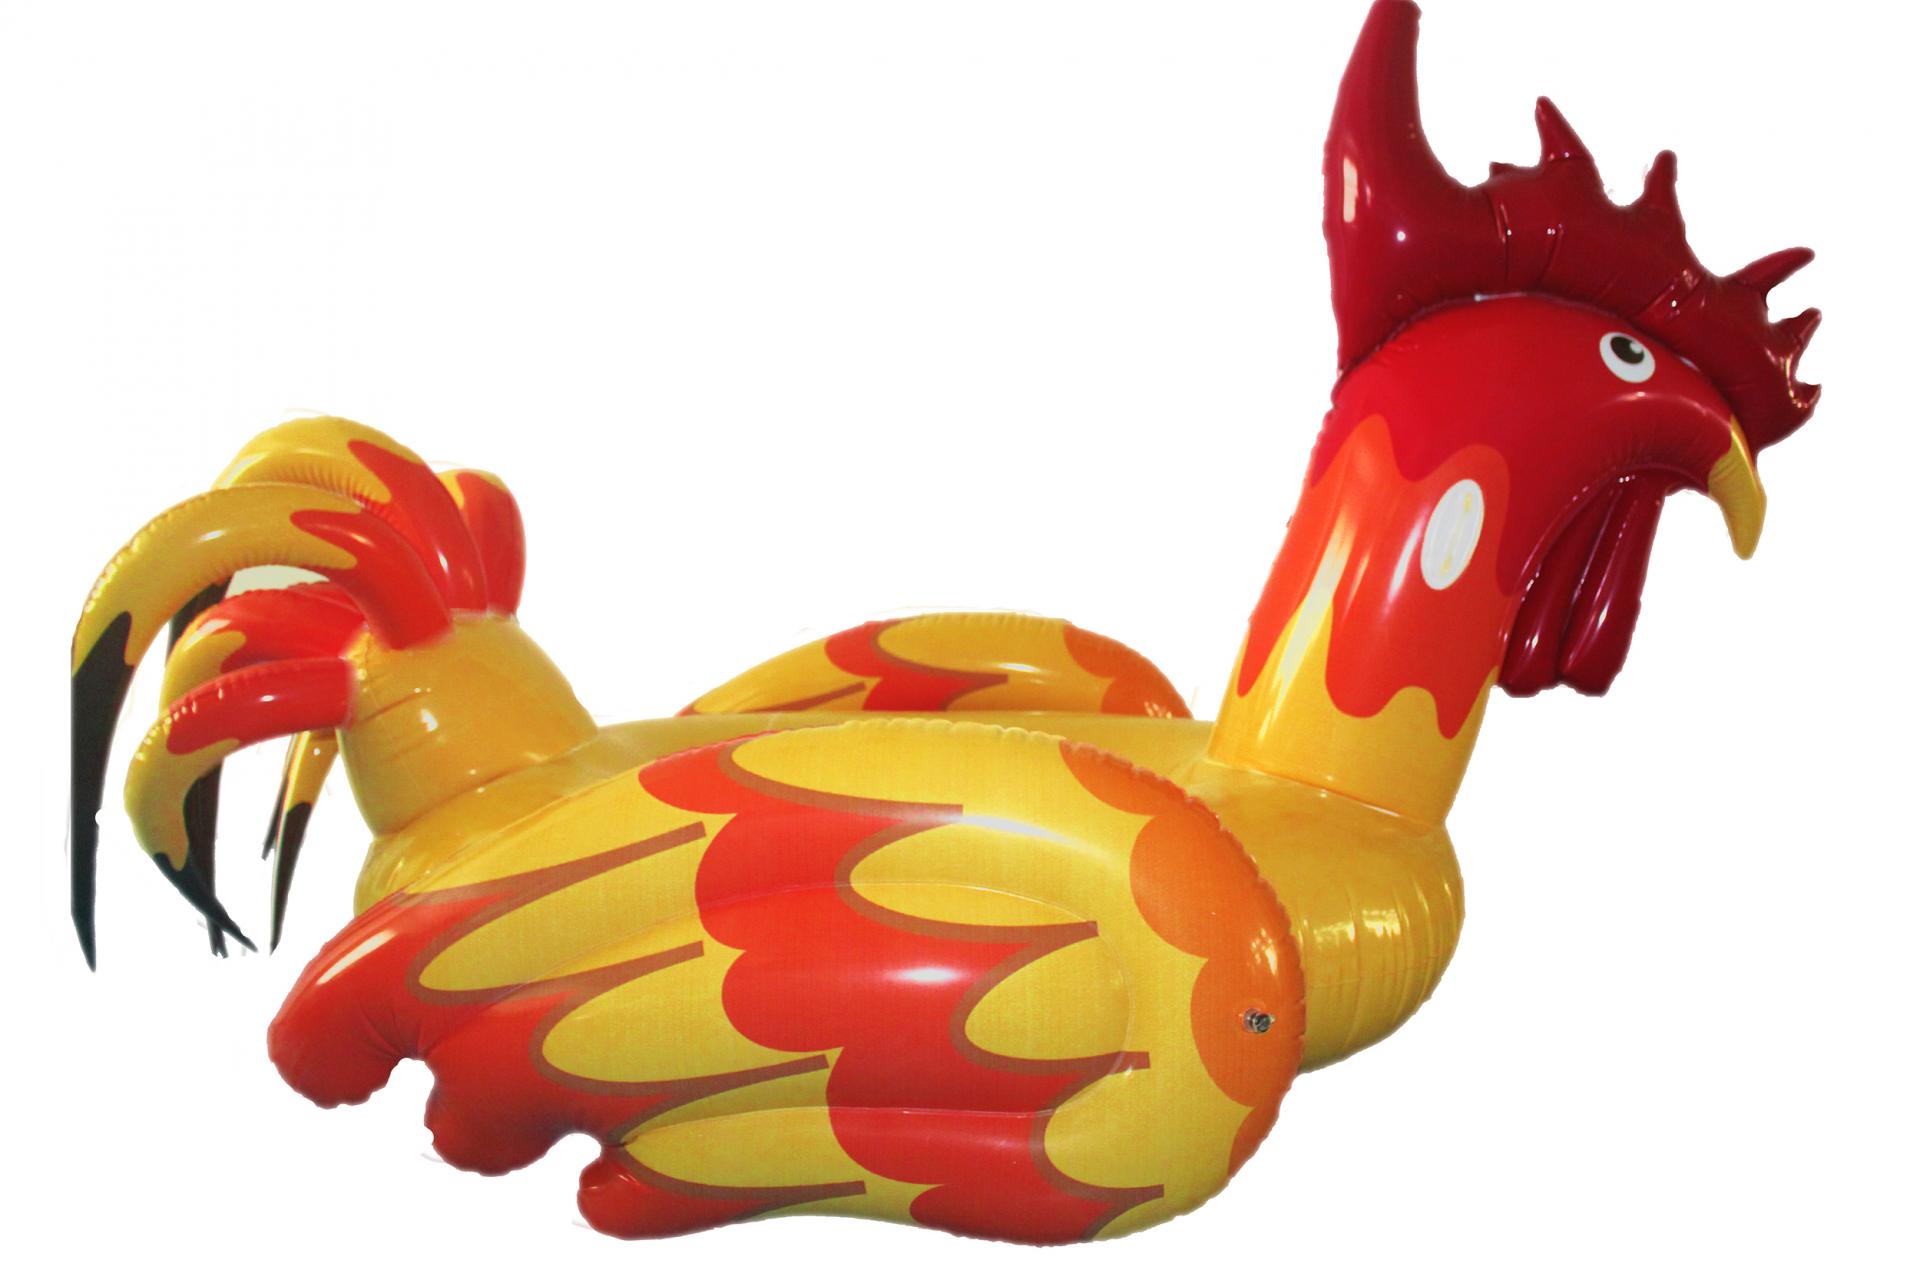 Inflatable 0.3MM PVC Rooster Cock Rider Float